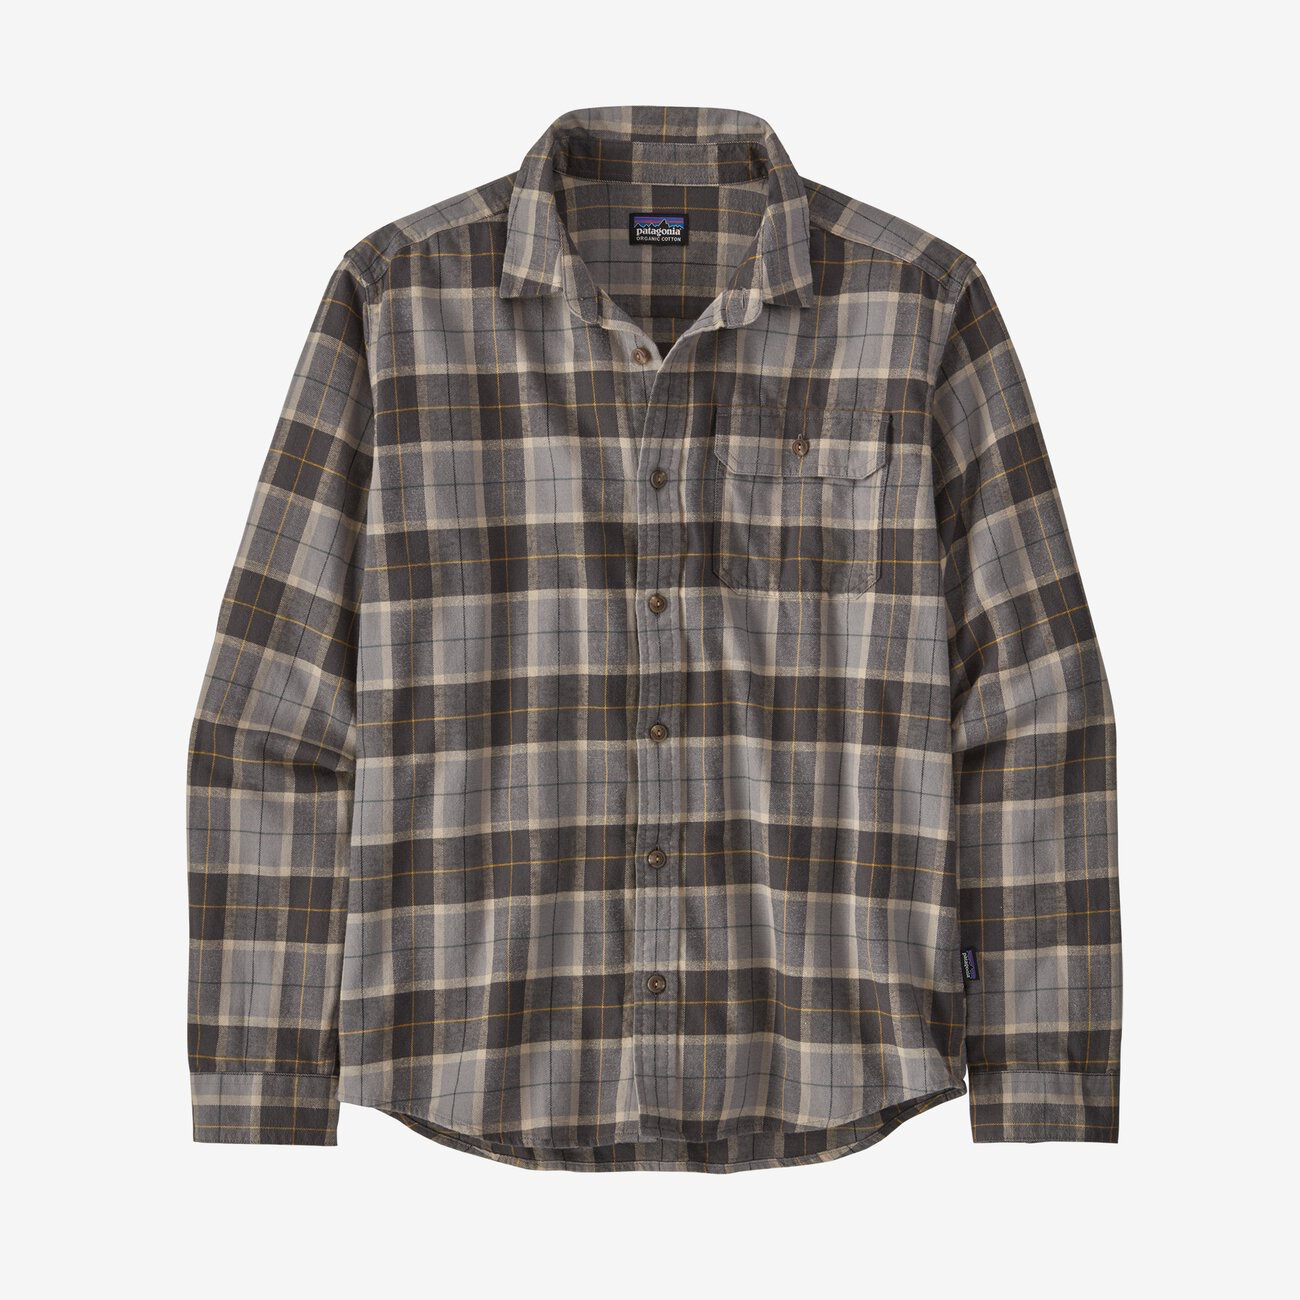 Patagonia M's L/S Cotton in Conversion LW Fjord Flannel Shirt - Beach Plaid: Forge Grey - XL